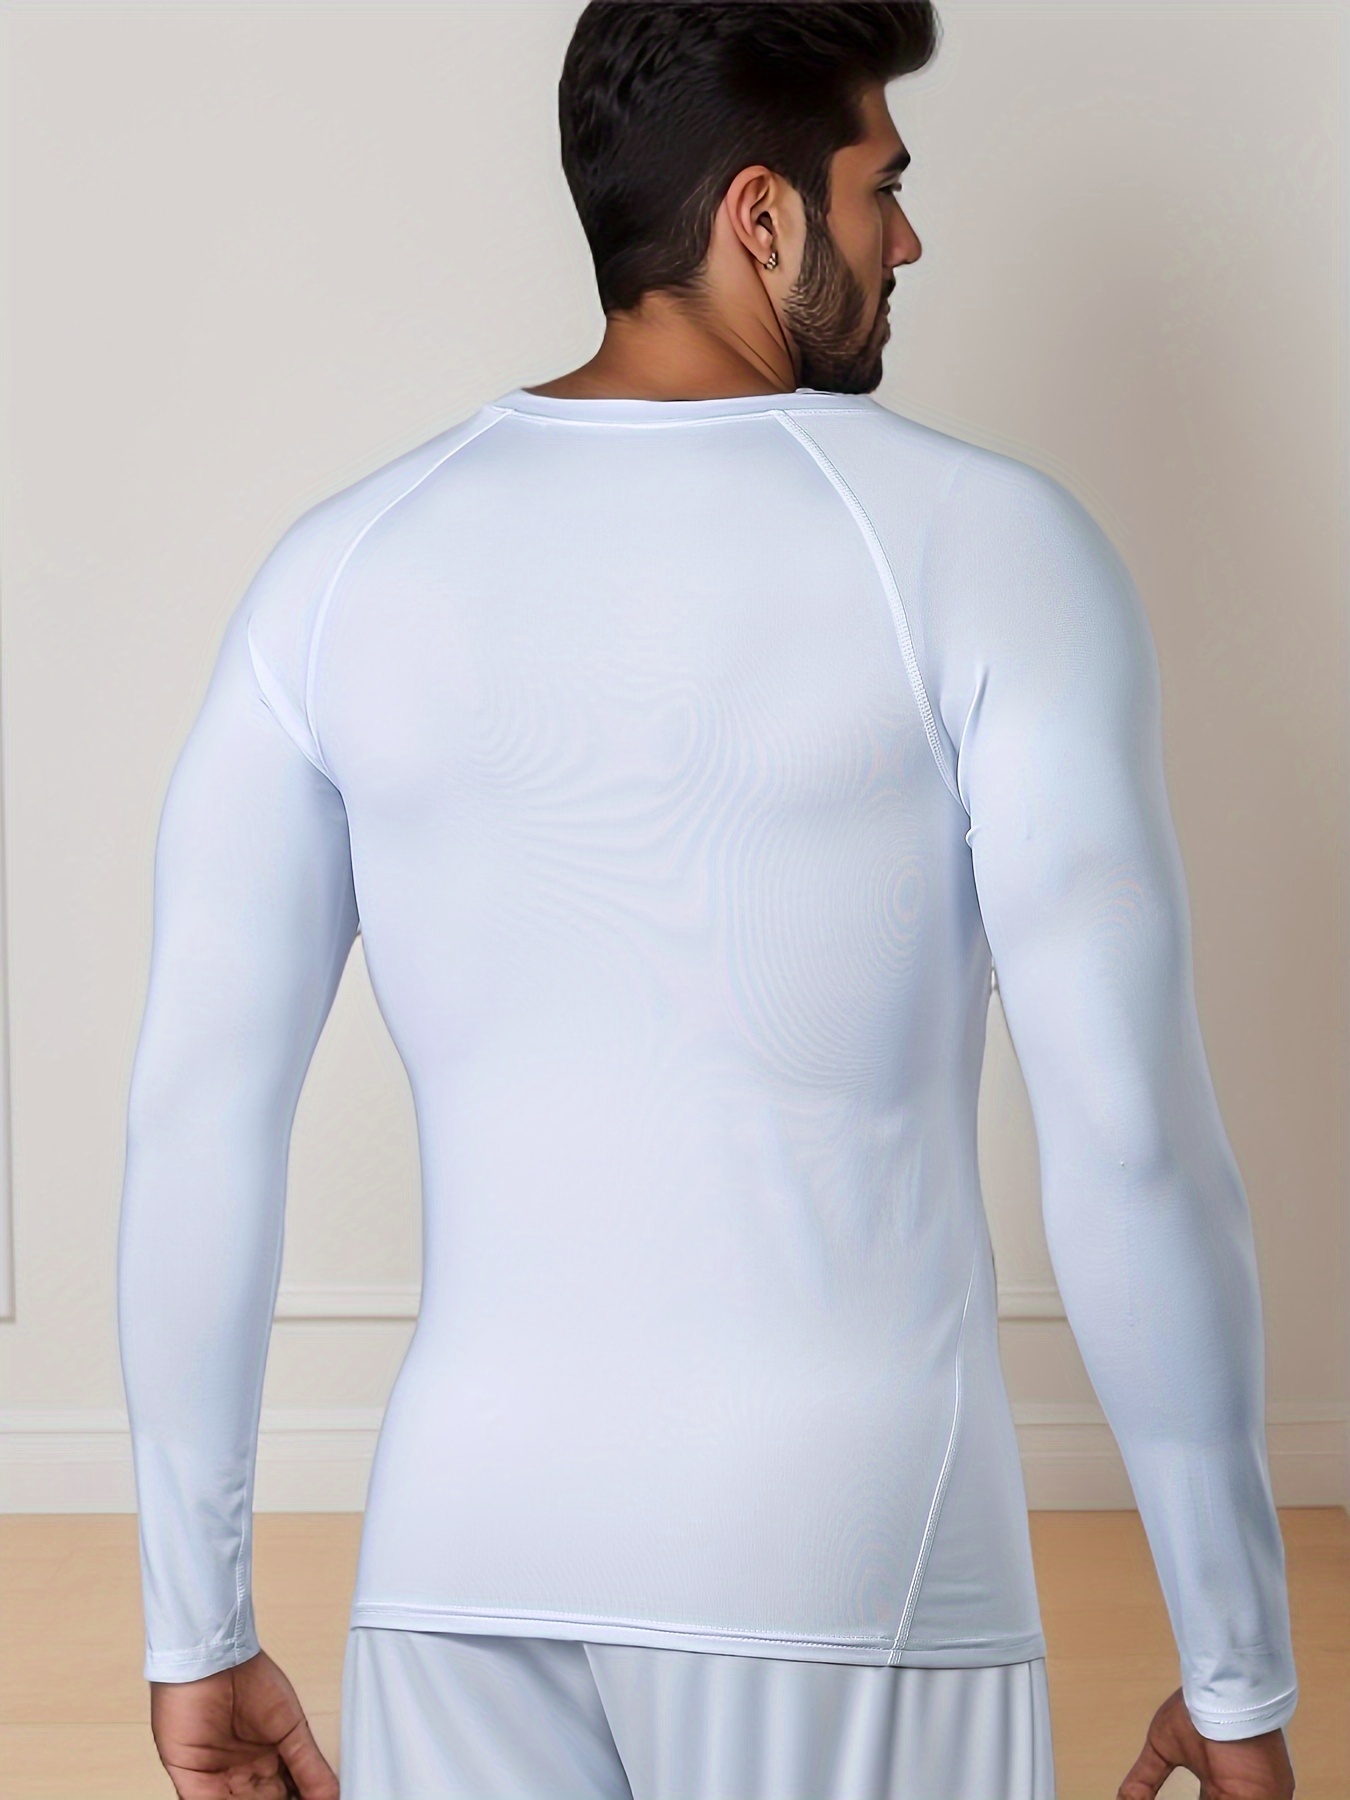 Thermal Underwear Set, Lightweight Warm Base Layers Long Johns for Hiking  Skiing Diving-Man E